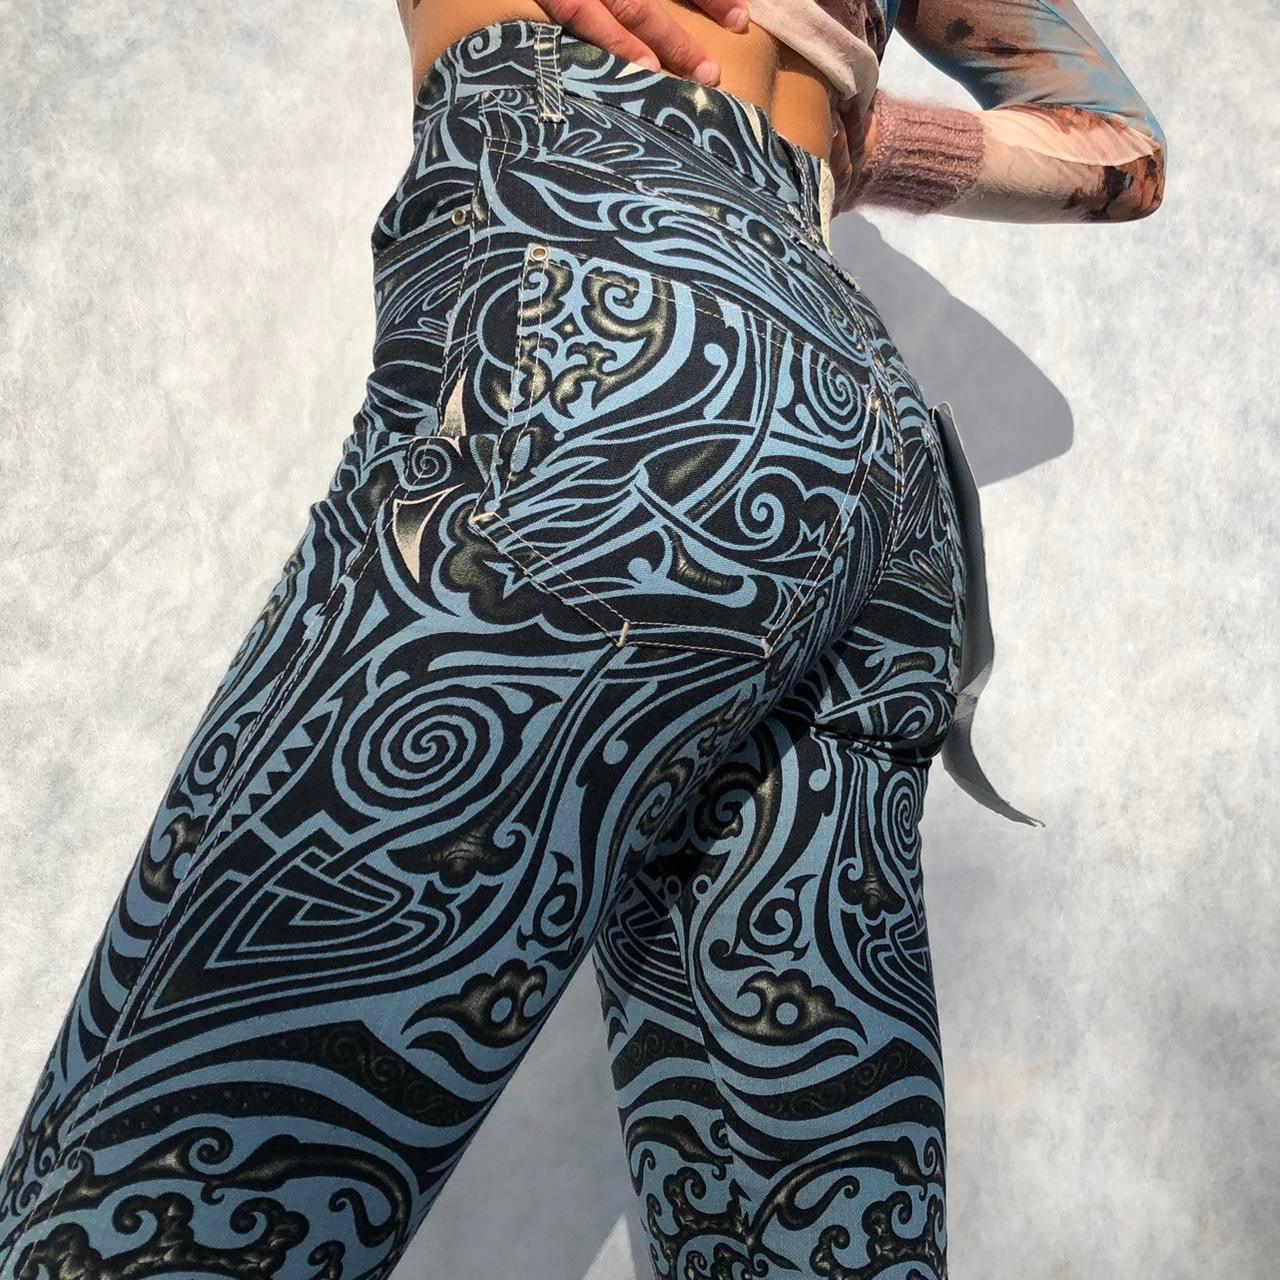 JEAN PAUL GAULTIER SS1996 TRIBAL PRINT TROUSERS - Known Source